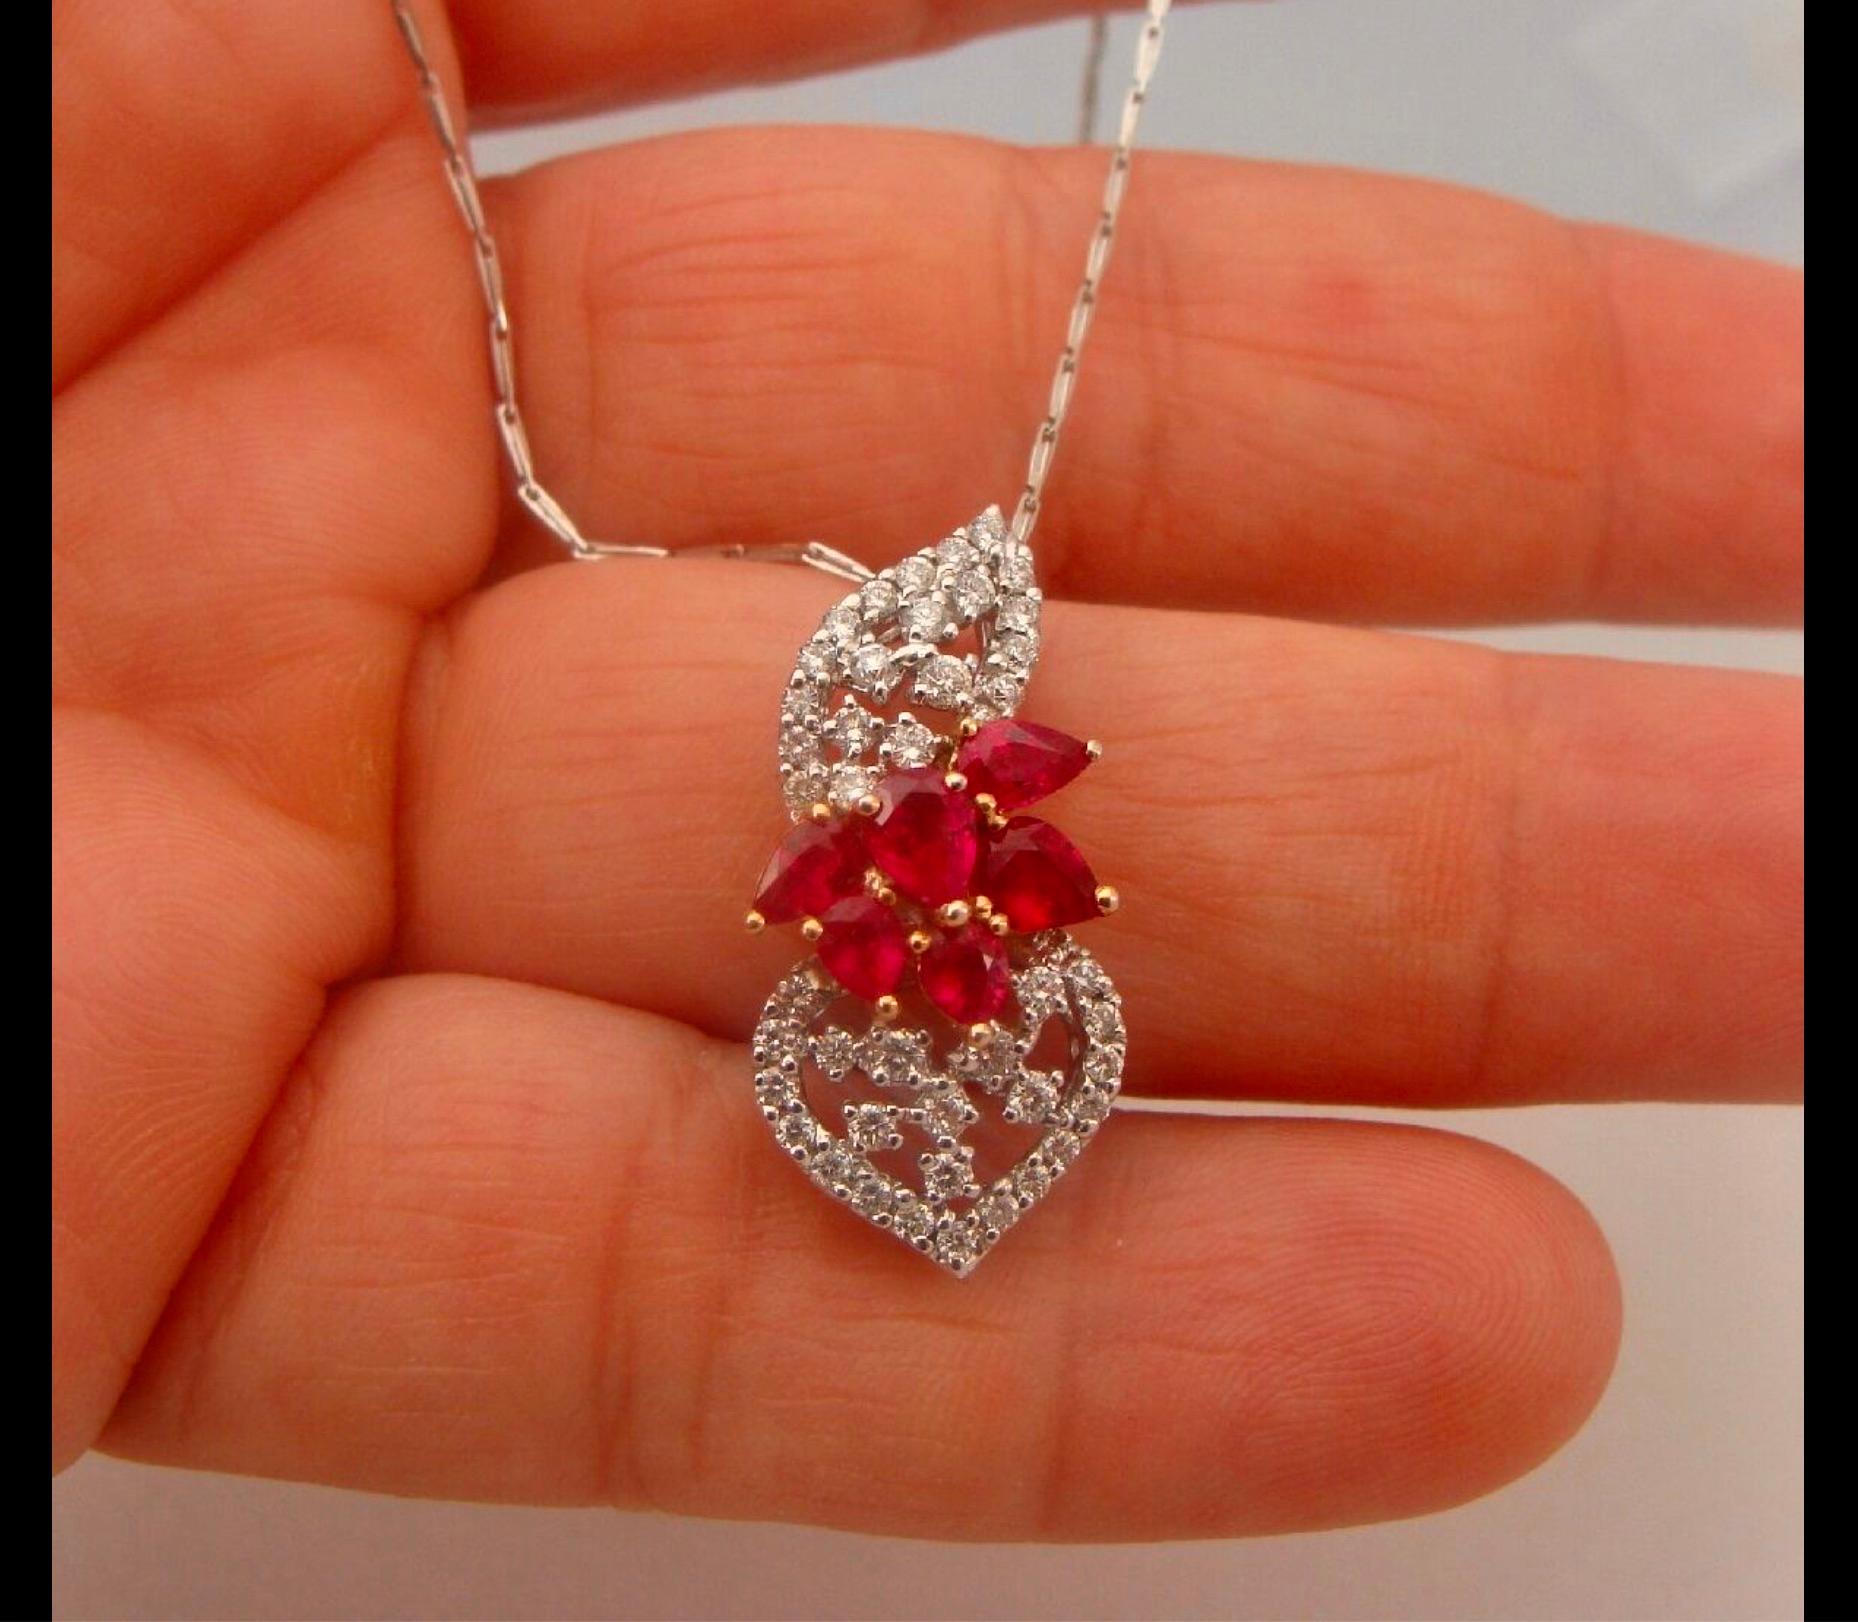 Beautiful design ruby diamond floral pendant in 18K white and yellow gold
The Pendant is centered with 6 genuine pear cut rubies approx. 2.50 carat and adorned with 45 natural diamonds approx. 1.50 carat. Color and clarity J-SI2/SI3 .
Total Weight 